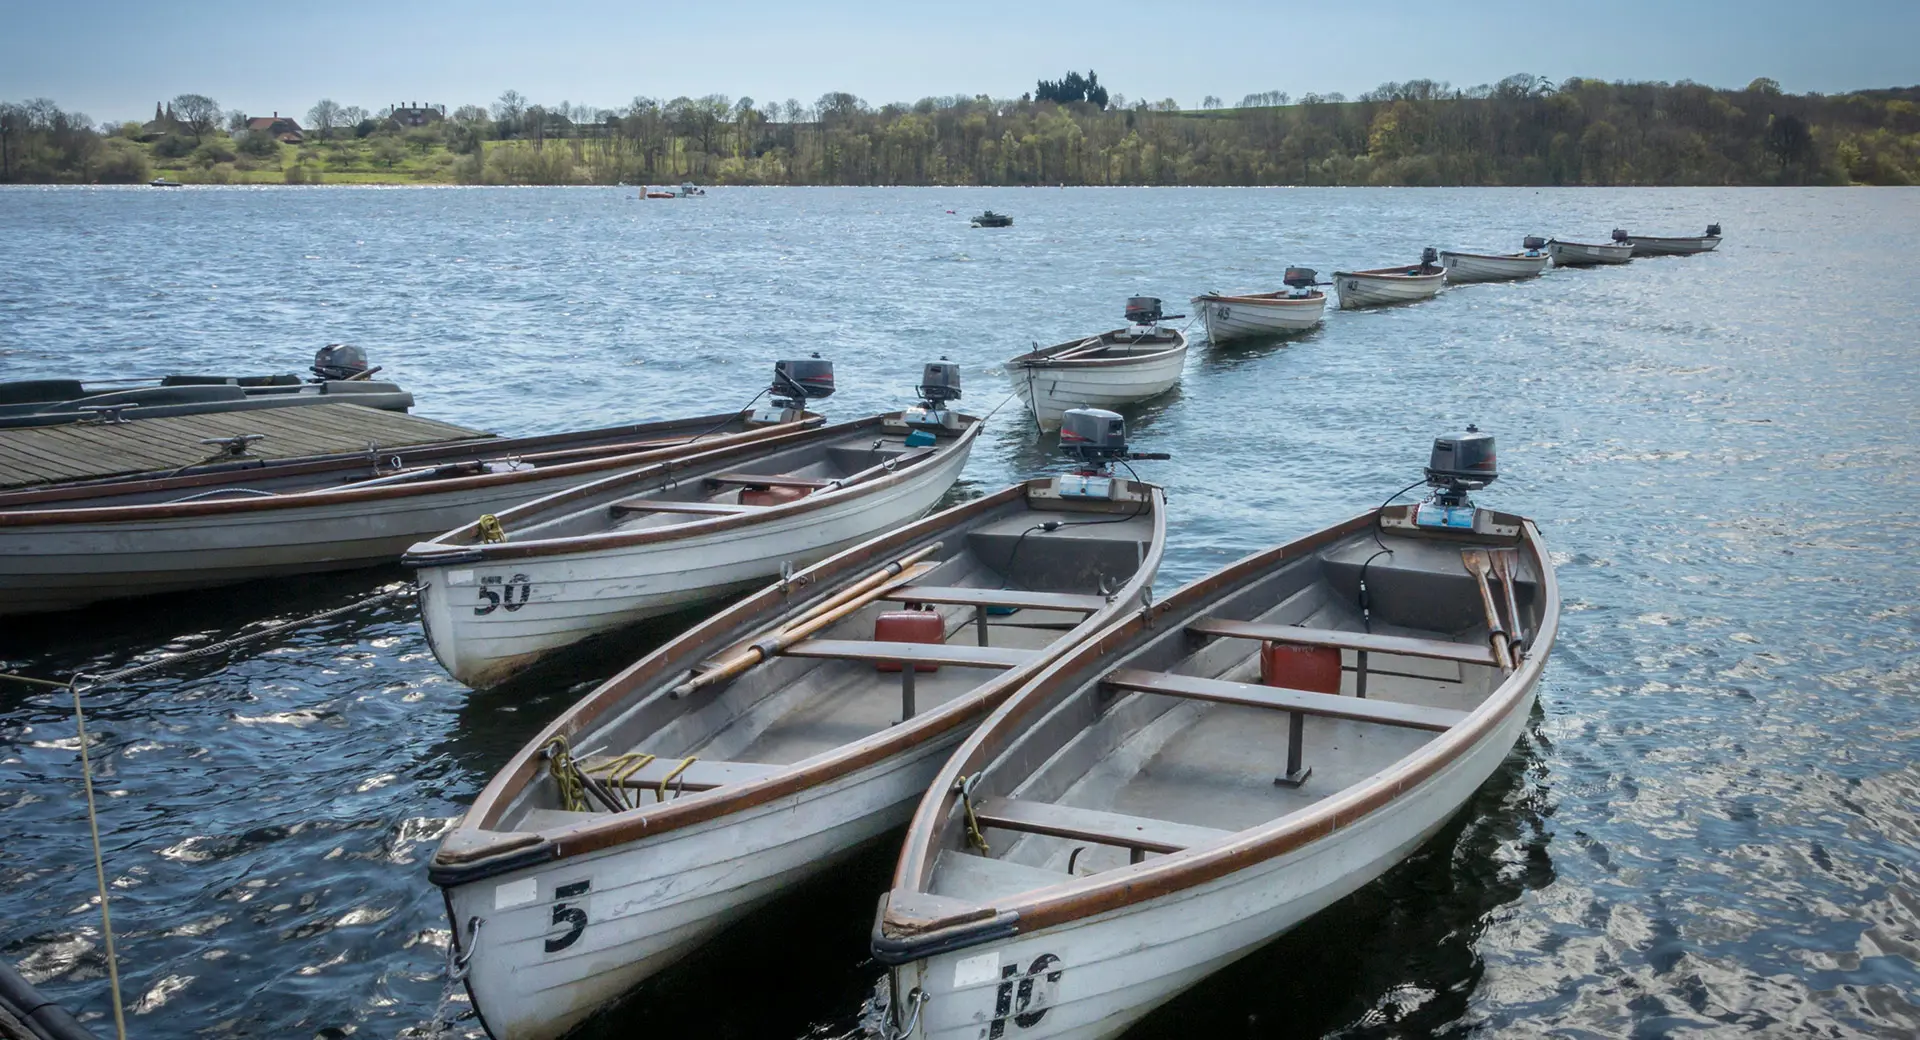 Rowing boats lined up on Bewl Water Reservoir